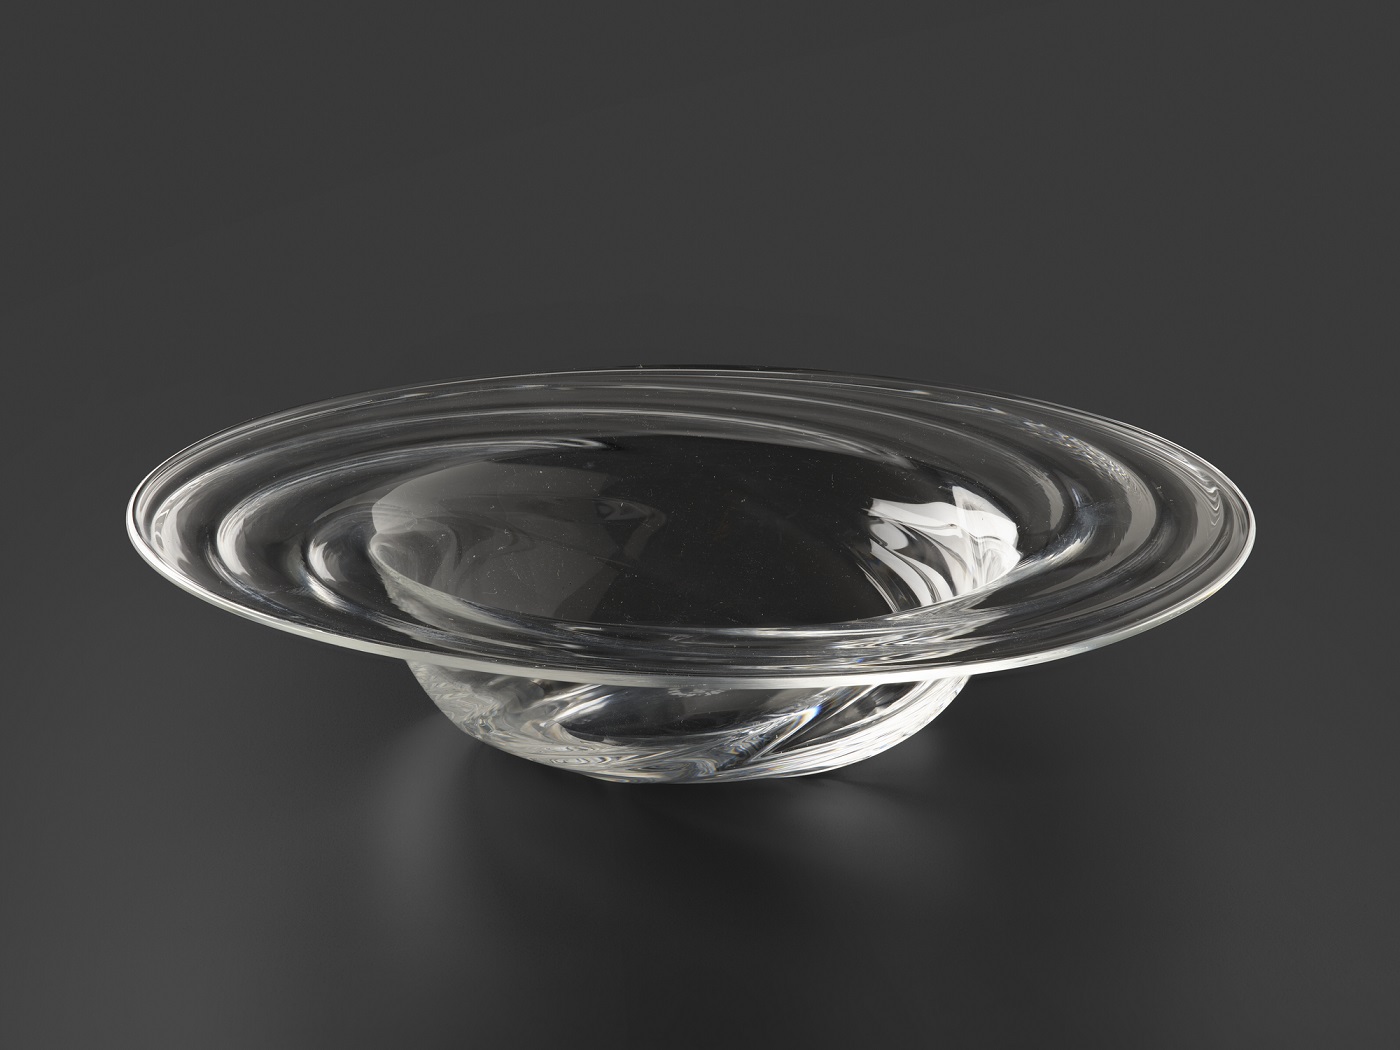 A translucent glass vessel shaped like an upside-down, broad-rimmed hat against a dark grey background. Lines on the glass rim resemble water spiraling in a sink.